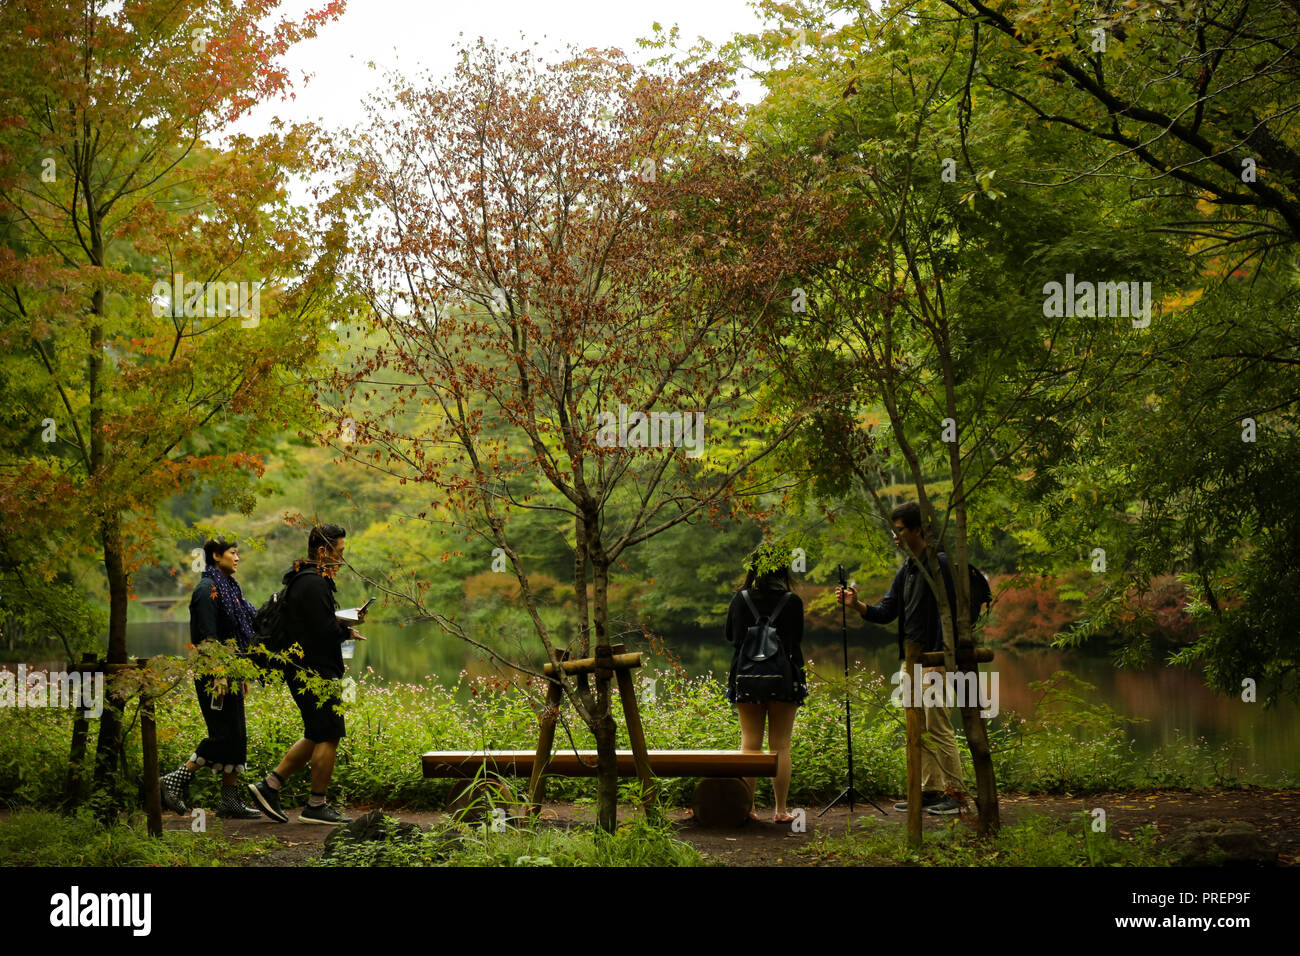 Autumn natural scenery for Kumobaike, With Pedestrians Stock Photo